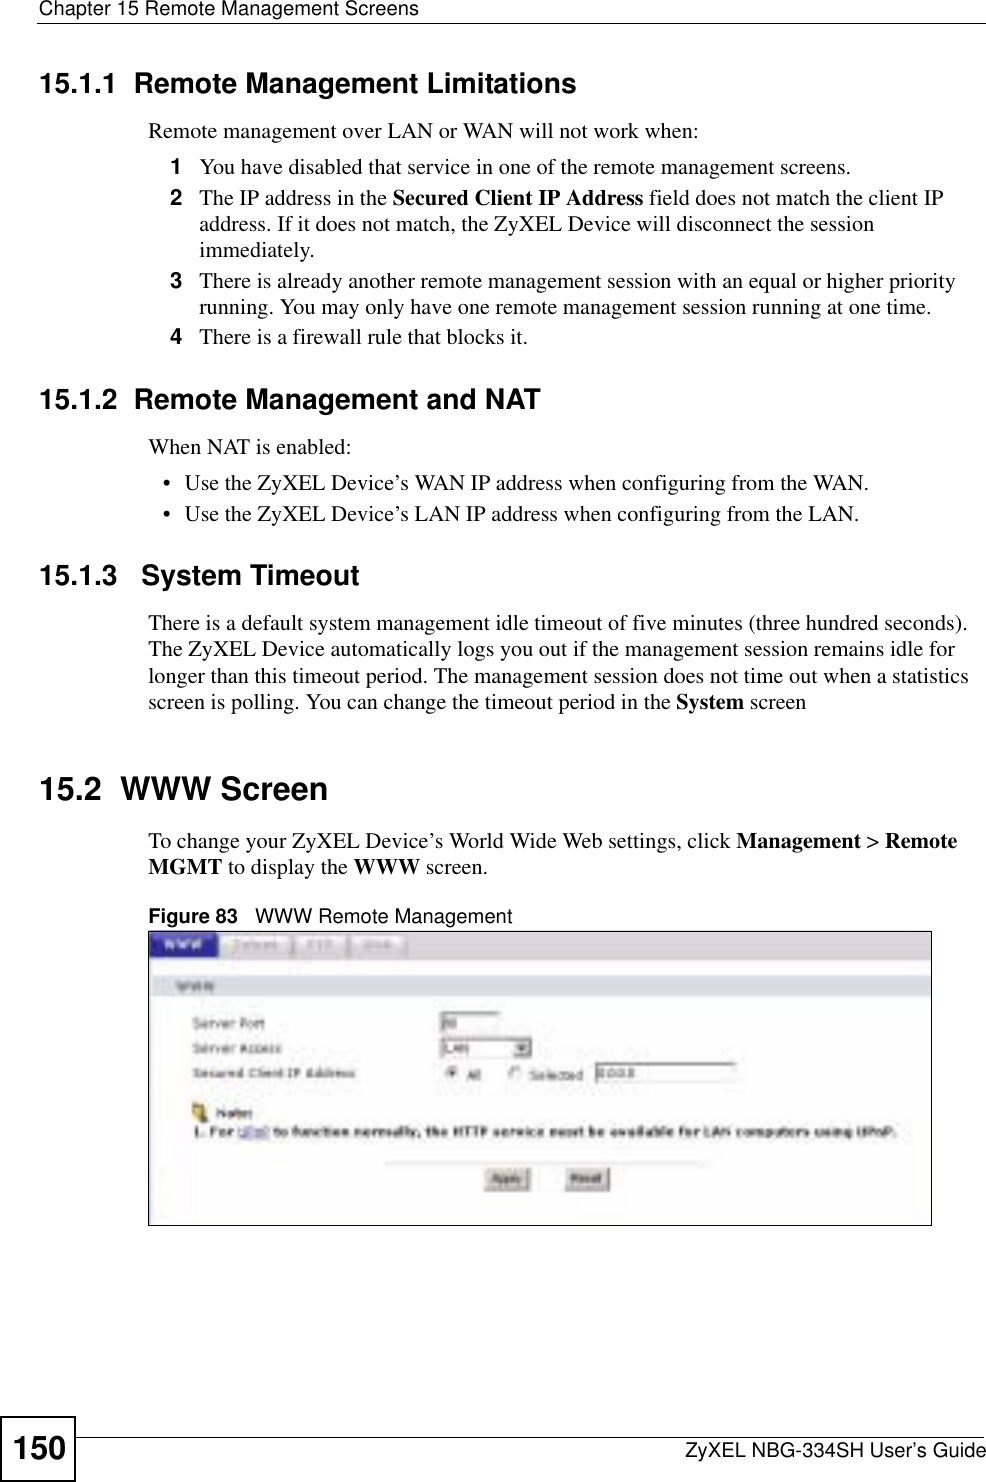 Chapter 15 Remote Management ScreensZyXEL NBG-334SH User’s Guide15015.1.1  Remote Management LimitationsRemote management over LAN or WAN will not work when:1You have disabled that service in one of the remote management screens.2The IP address in the Secured Client IP Address field does not match the client IP address. If it does not match, the ZyXEL Device will disconnect the session immediately.3There is already another remote management session with an equal or higher priority running. You may only have one remote management session running at one time.4There is a firewall rule that blocks it.15.1.2  Remote Management and NATWhen NAT is enabled:• Use the ZyXEL Device’s WAN IP address when configuring from the WAN. • Use the ZyXEL Device’s LAN IP address when configuring from the LAN.15.1.3   System TimeoutThere is a default system management idle timeout of five minutes (three hundred seconds). The ZyXEL Device automatically logs you out if the management session remains idle for longer than this timeout period. The management session does not time out when a statistics screen is polling. You can change the timeout period in the System screen15.2  WWW ScreenTo change your ZyXEL Device’s World Wide Web settings, click Management &gt; RemoteMGMT to display the WWW screen.Figure 83   WWW Remote Management